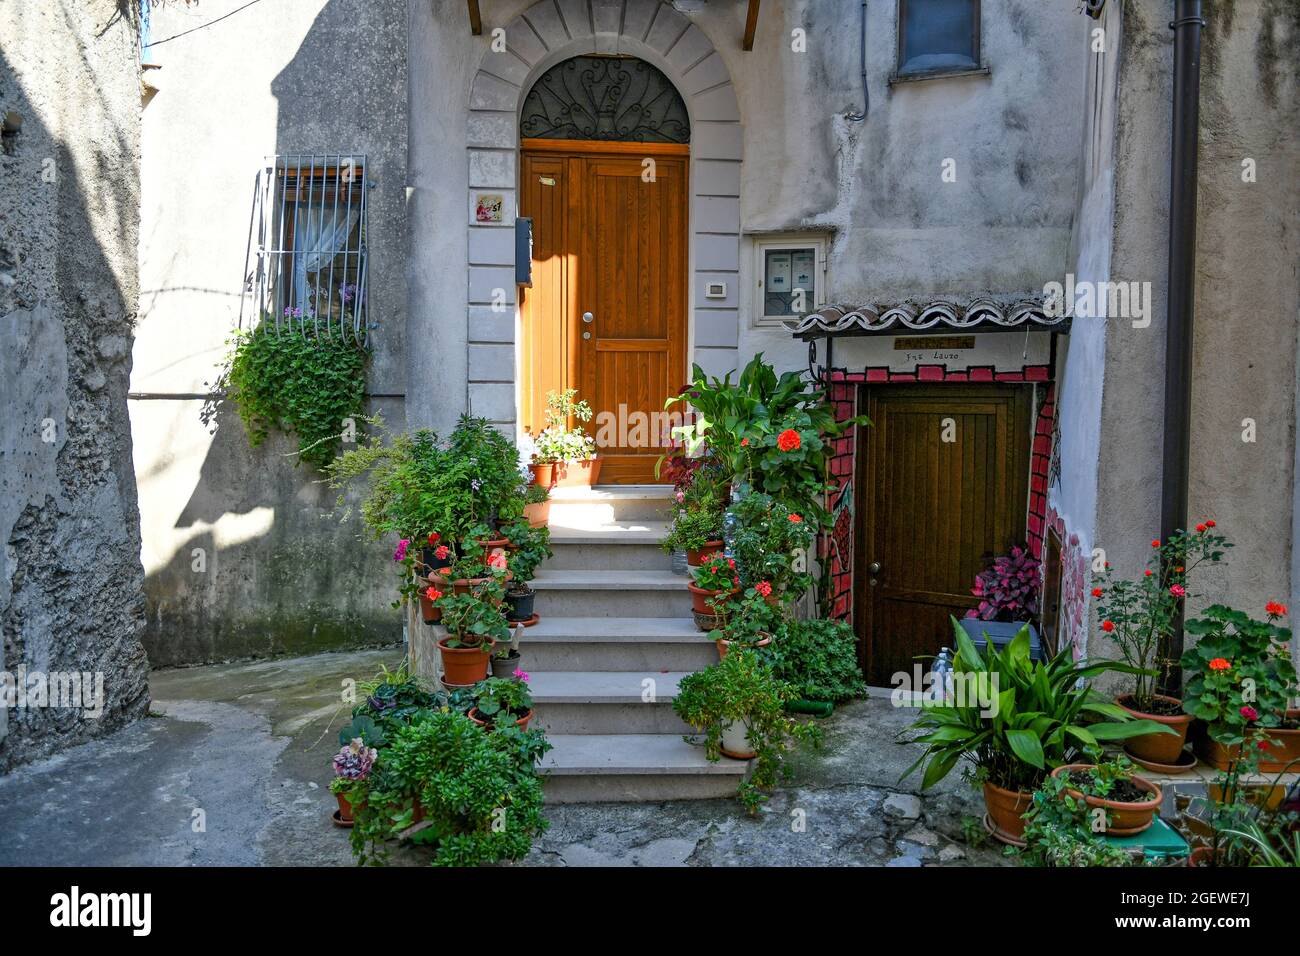 The door of an old house in the historic center of Rivello, a medieval town in the Basilicata region, Italy. Stock Photo